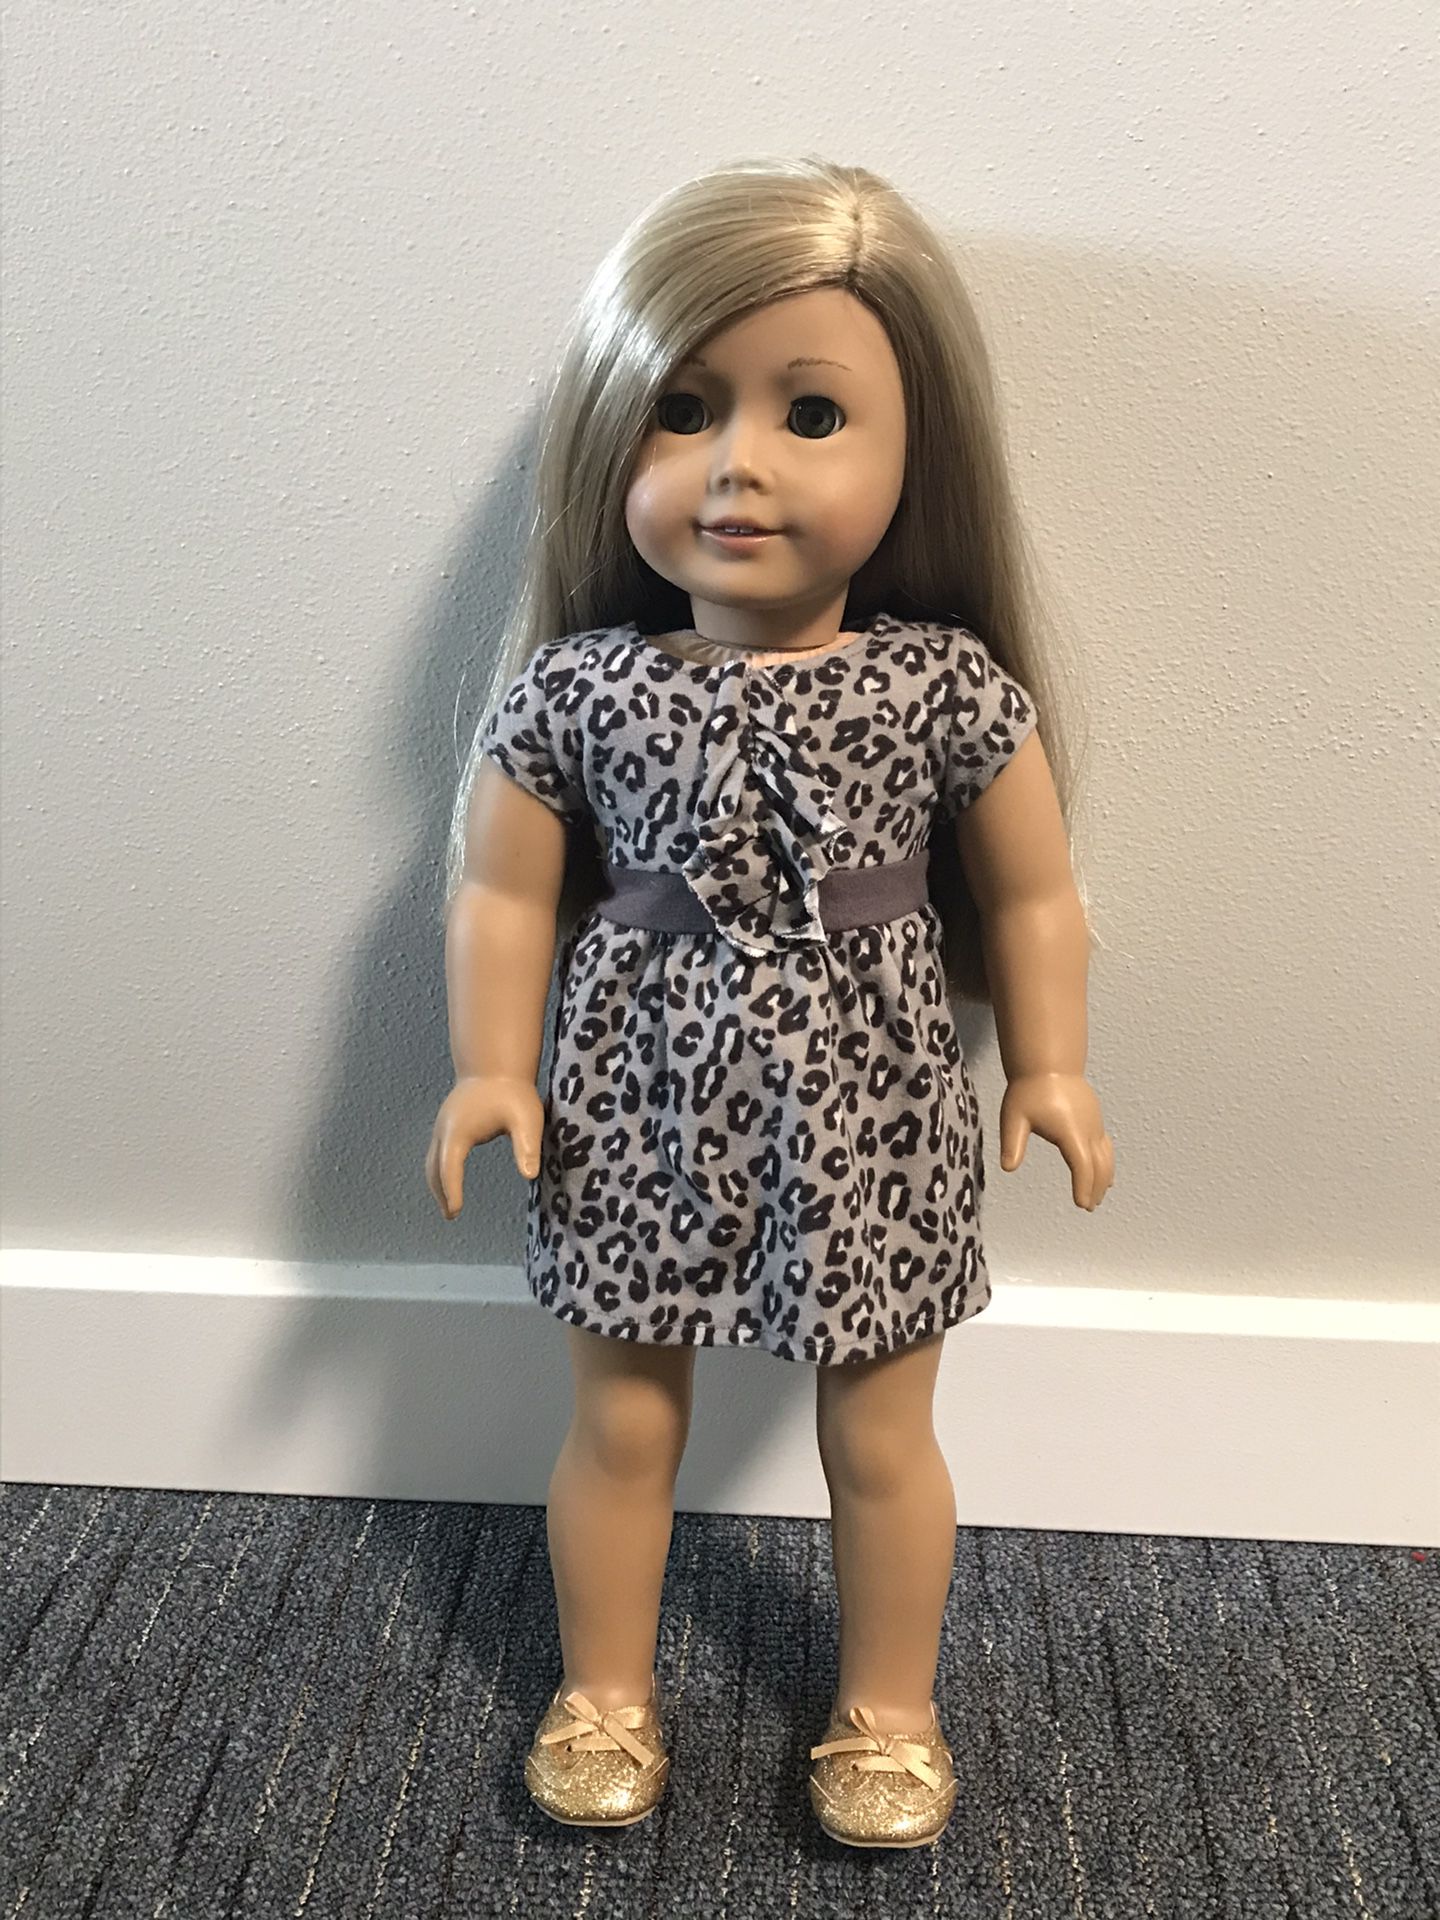 American girl doll with accessories.